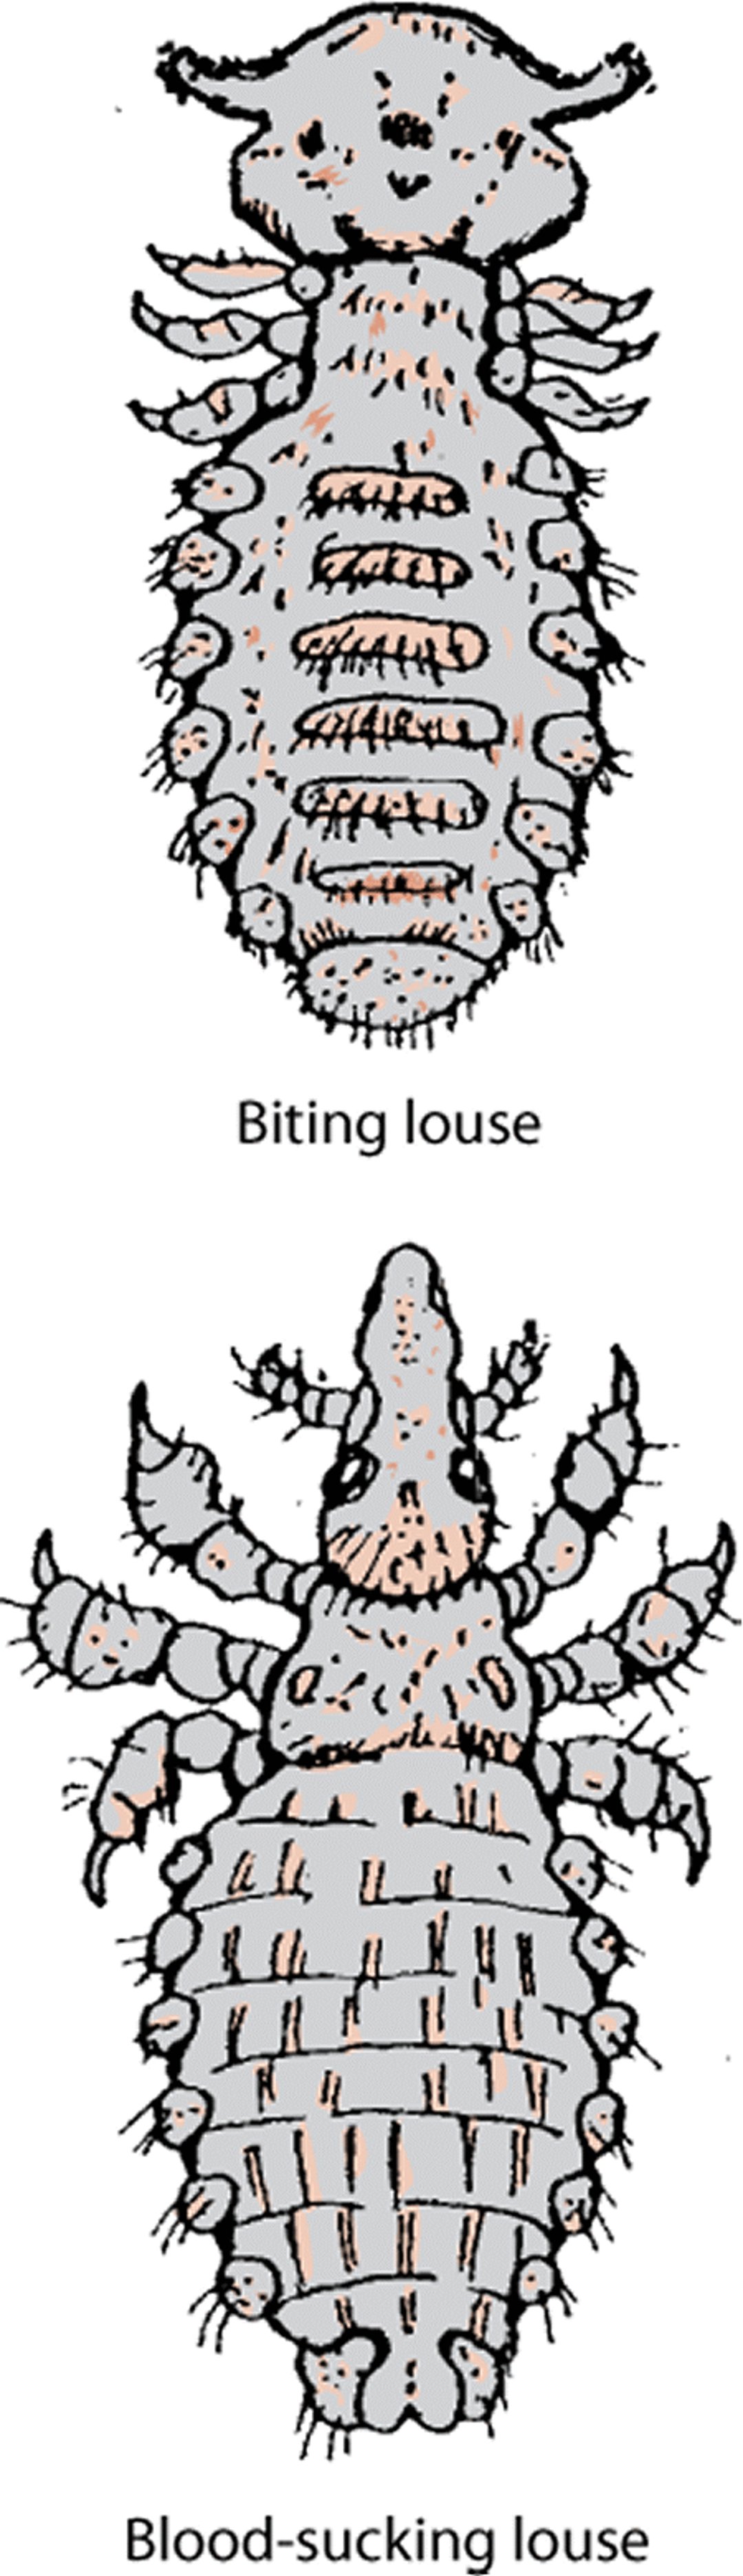 Biting or chewing louse (order Mallophaga) and blood-sucking louse (order Anoplura)